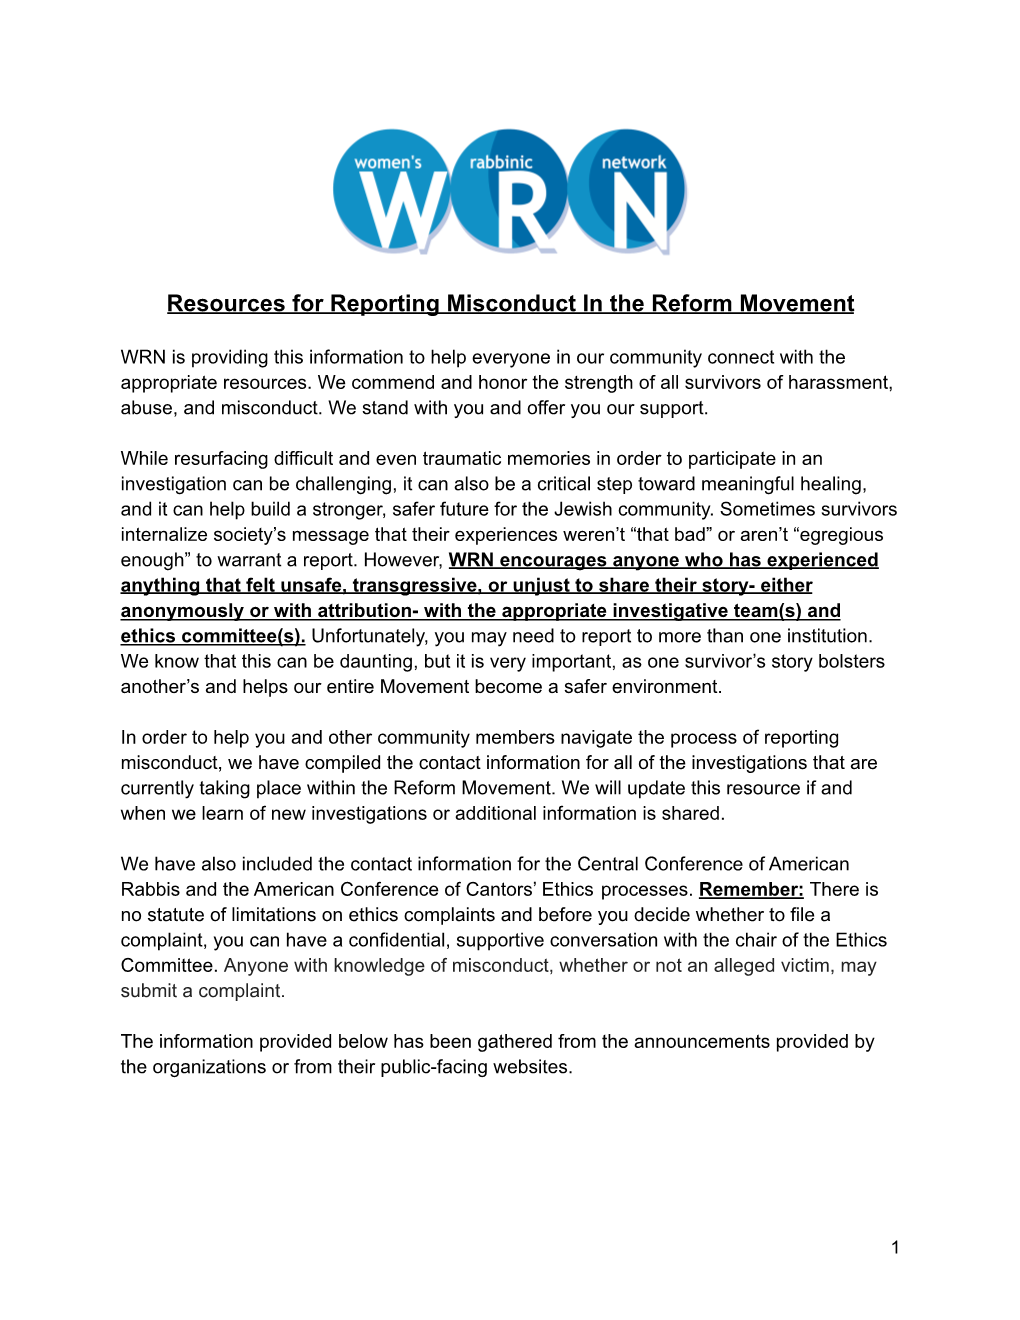 WRN's Resources for Reporting Misconduct in the Reform Movement